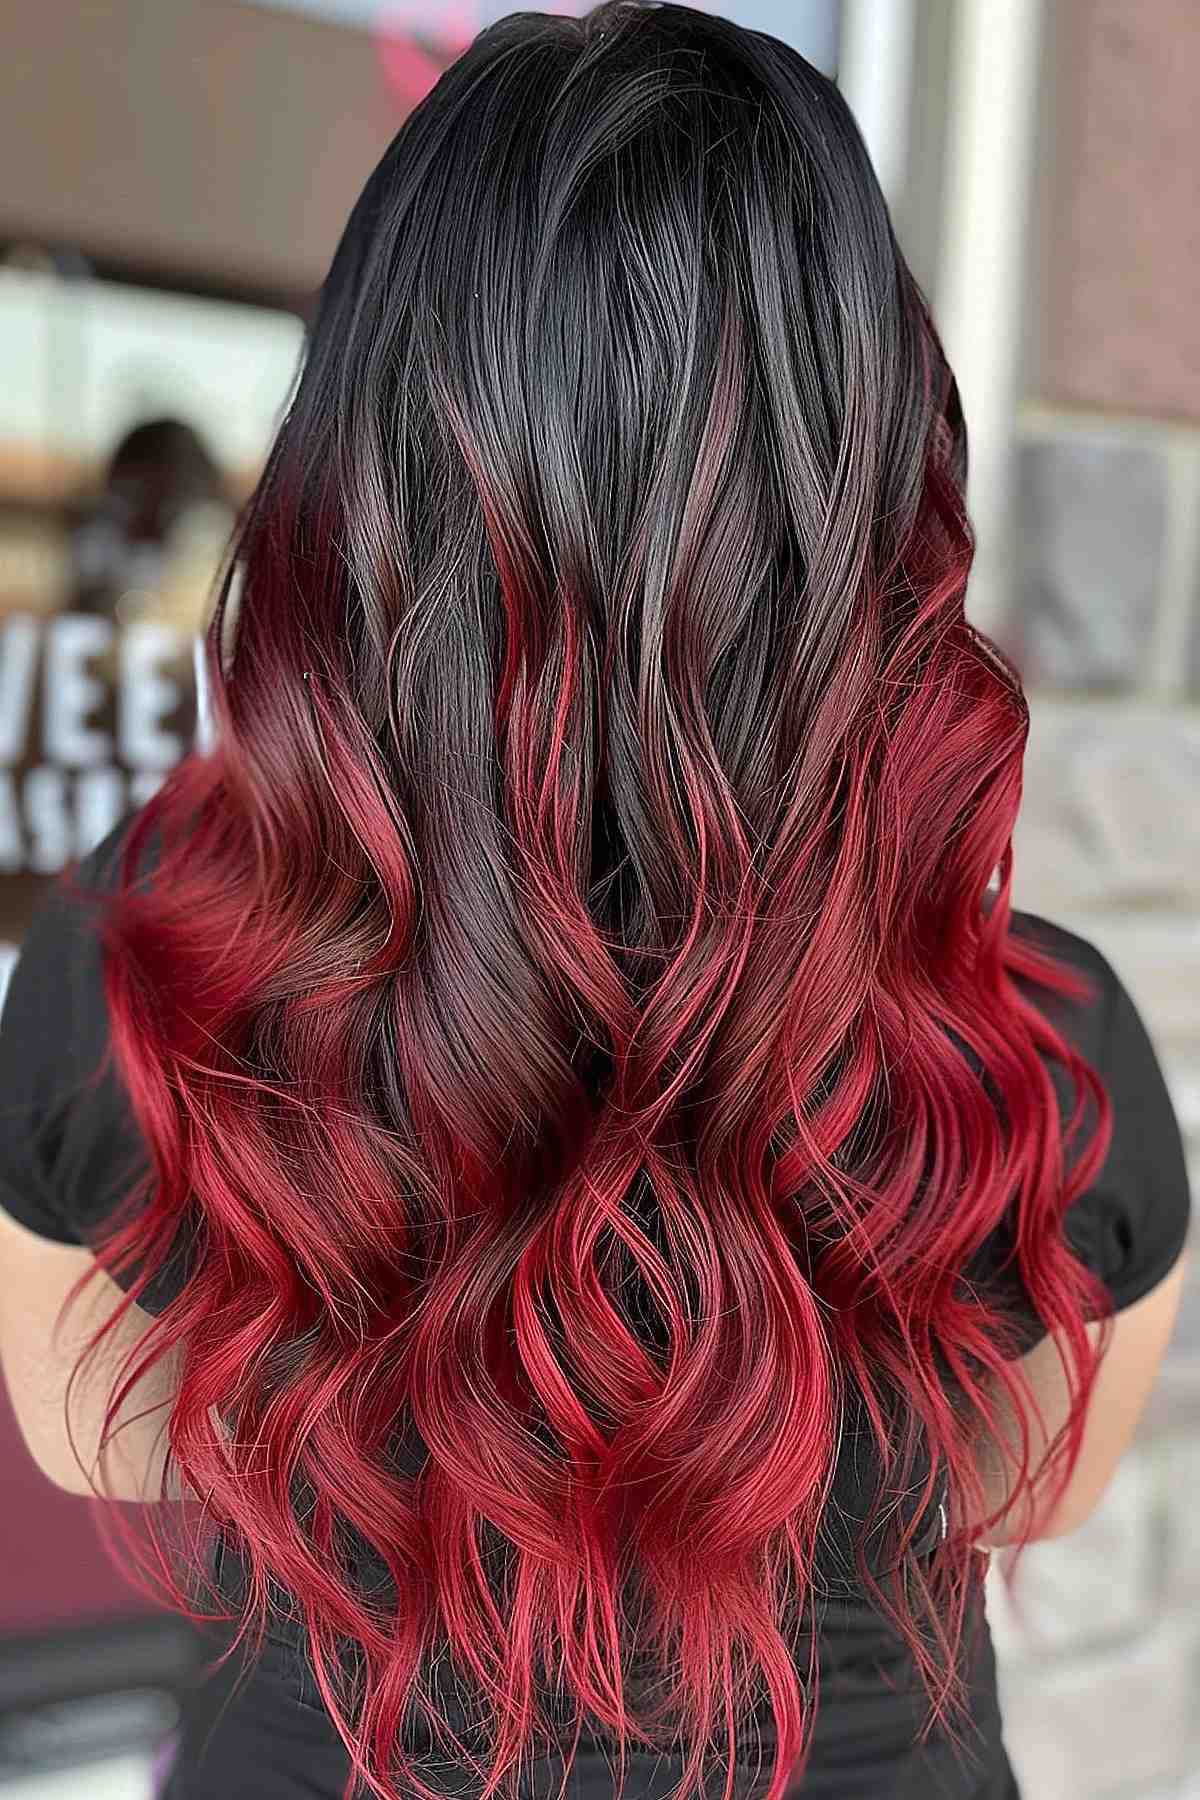 Dark to cherry red ombre hair showcasing a vibrant transition ideal for any hair type.